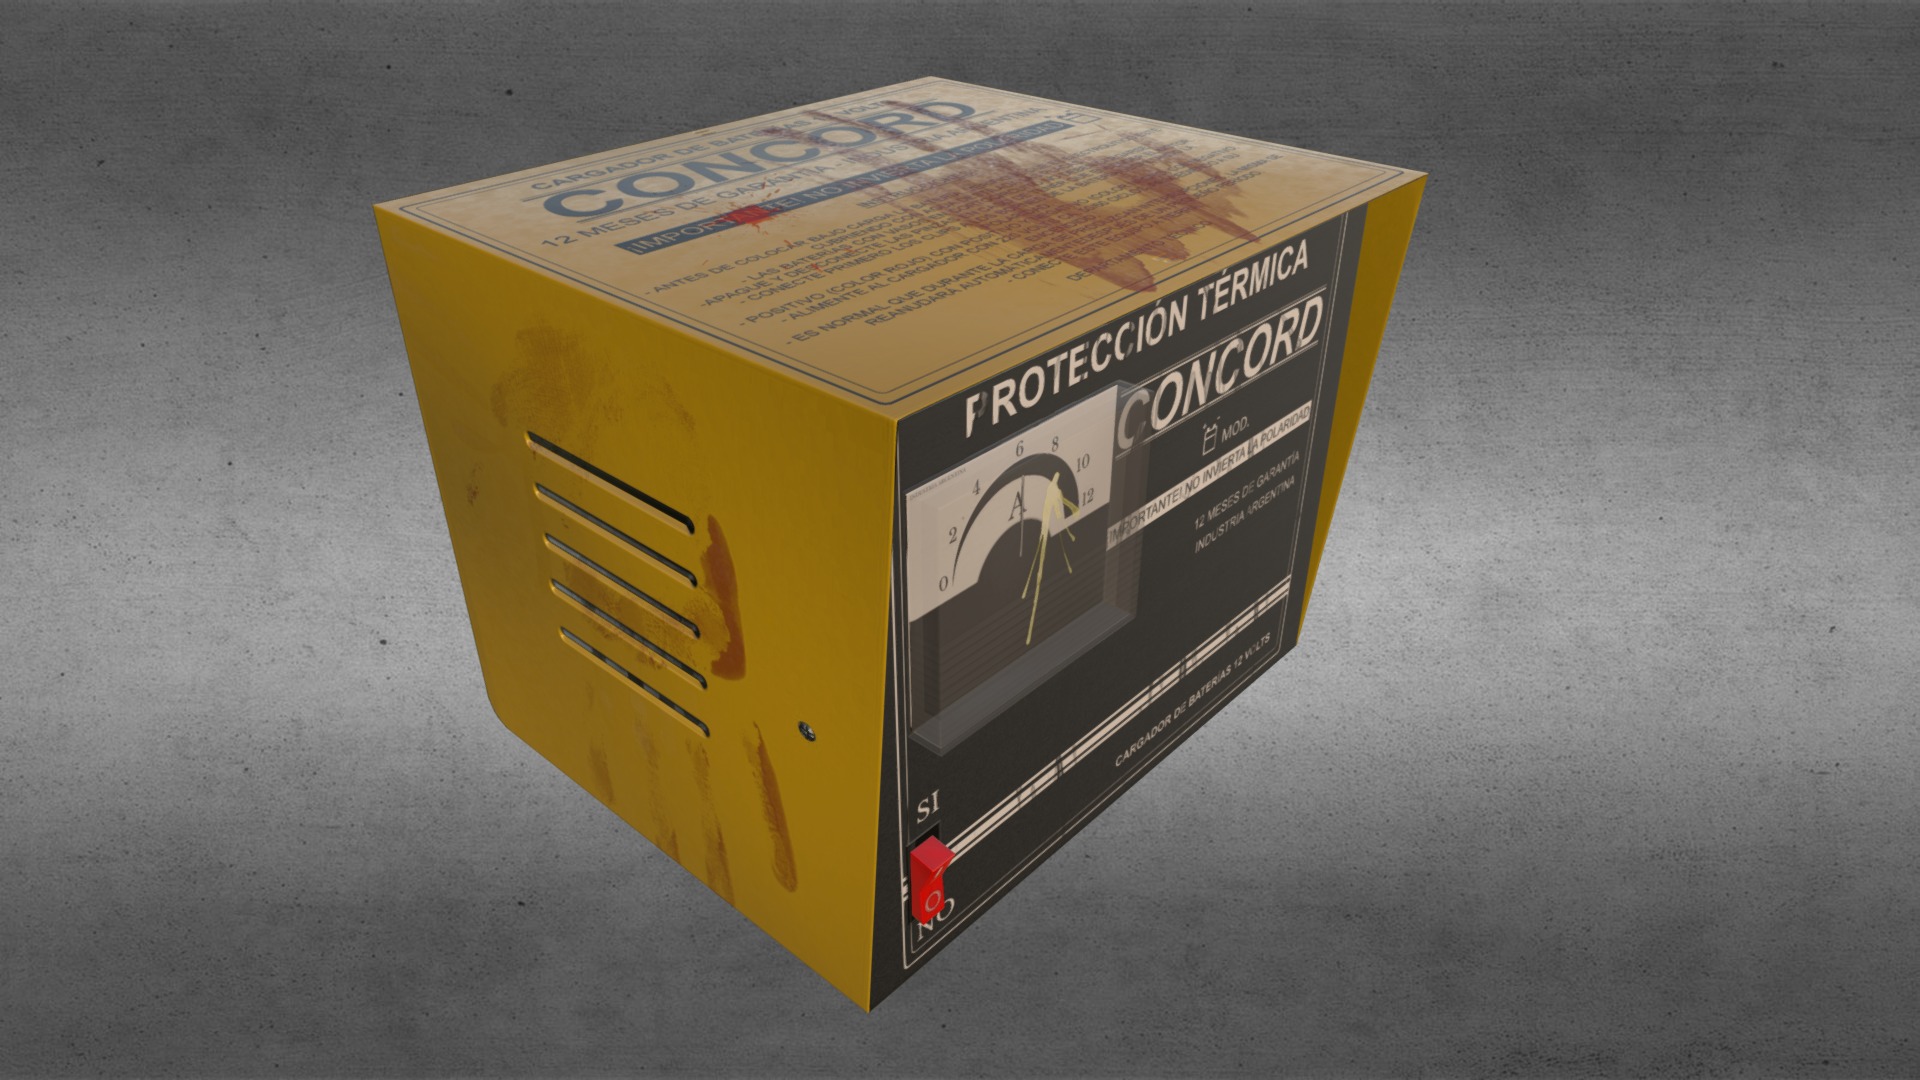 3D model Car battery charger Condord 12 volts - This is a 3D model of the Car battery charger Condord 12 volts. The 3D model is about a yellow box with a black cover.